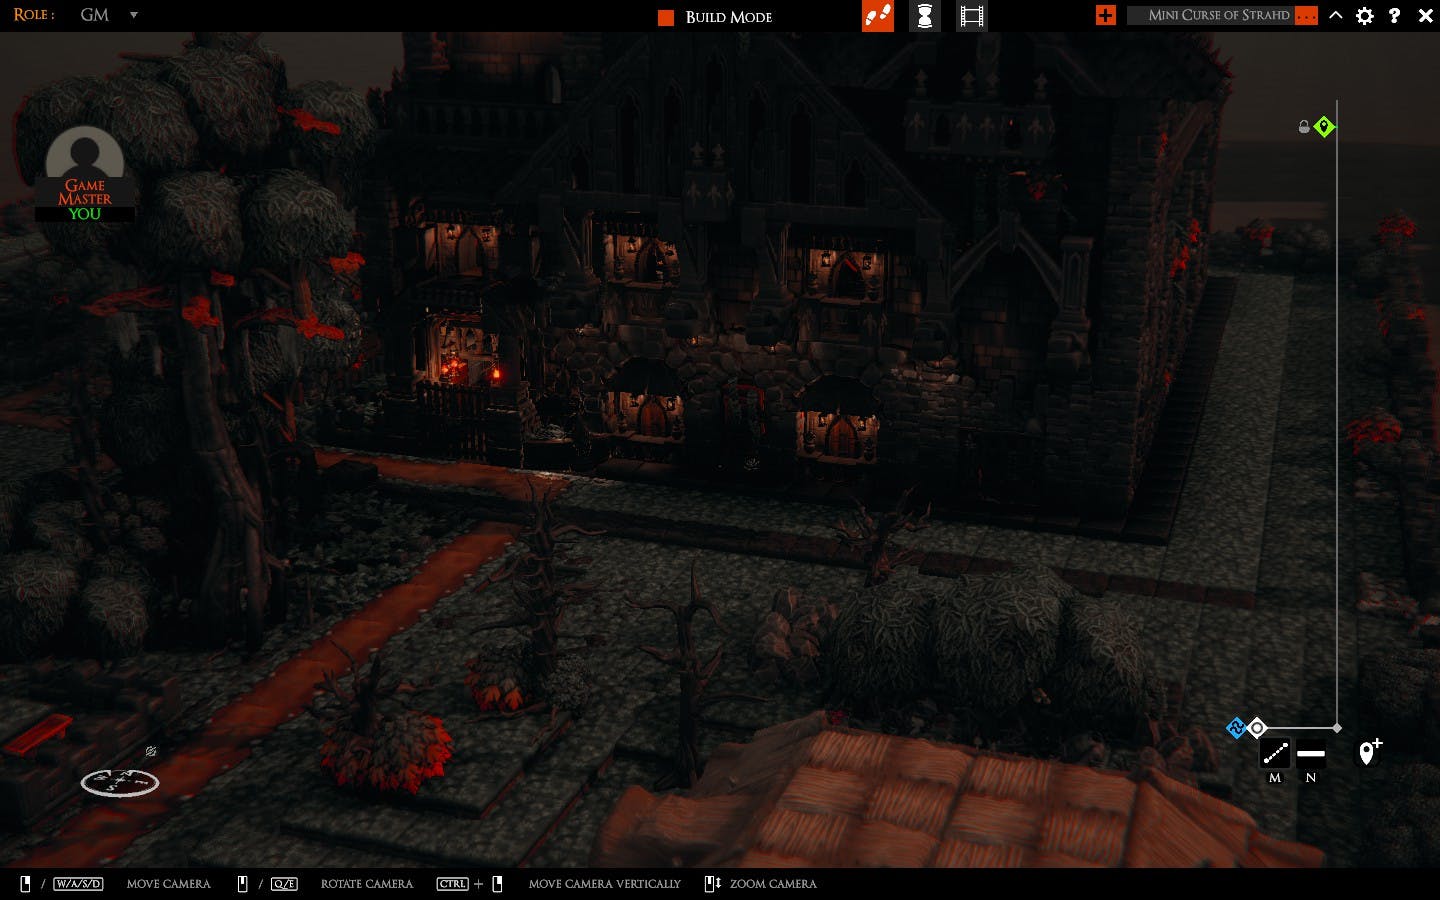 Play Dungeons & Dragons 5e Online  The House of Lament 🌘 Spooky Season  Short Horror Adventure